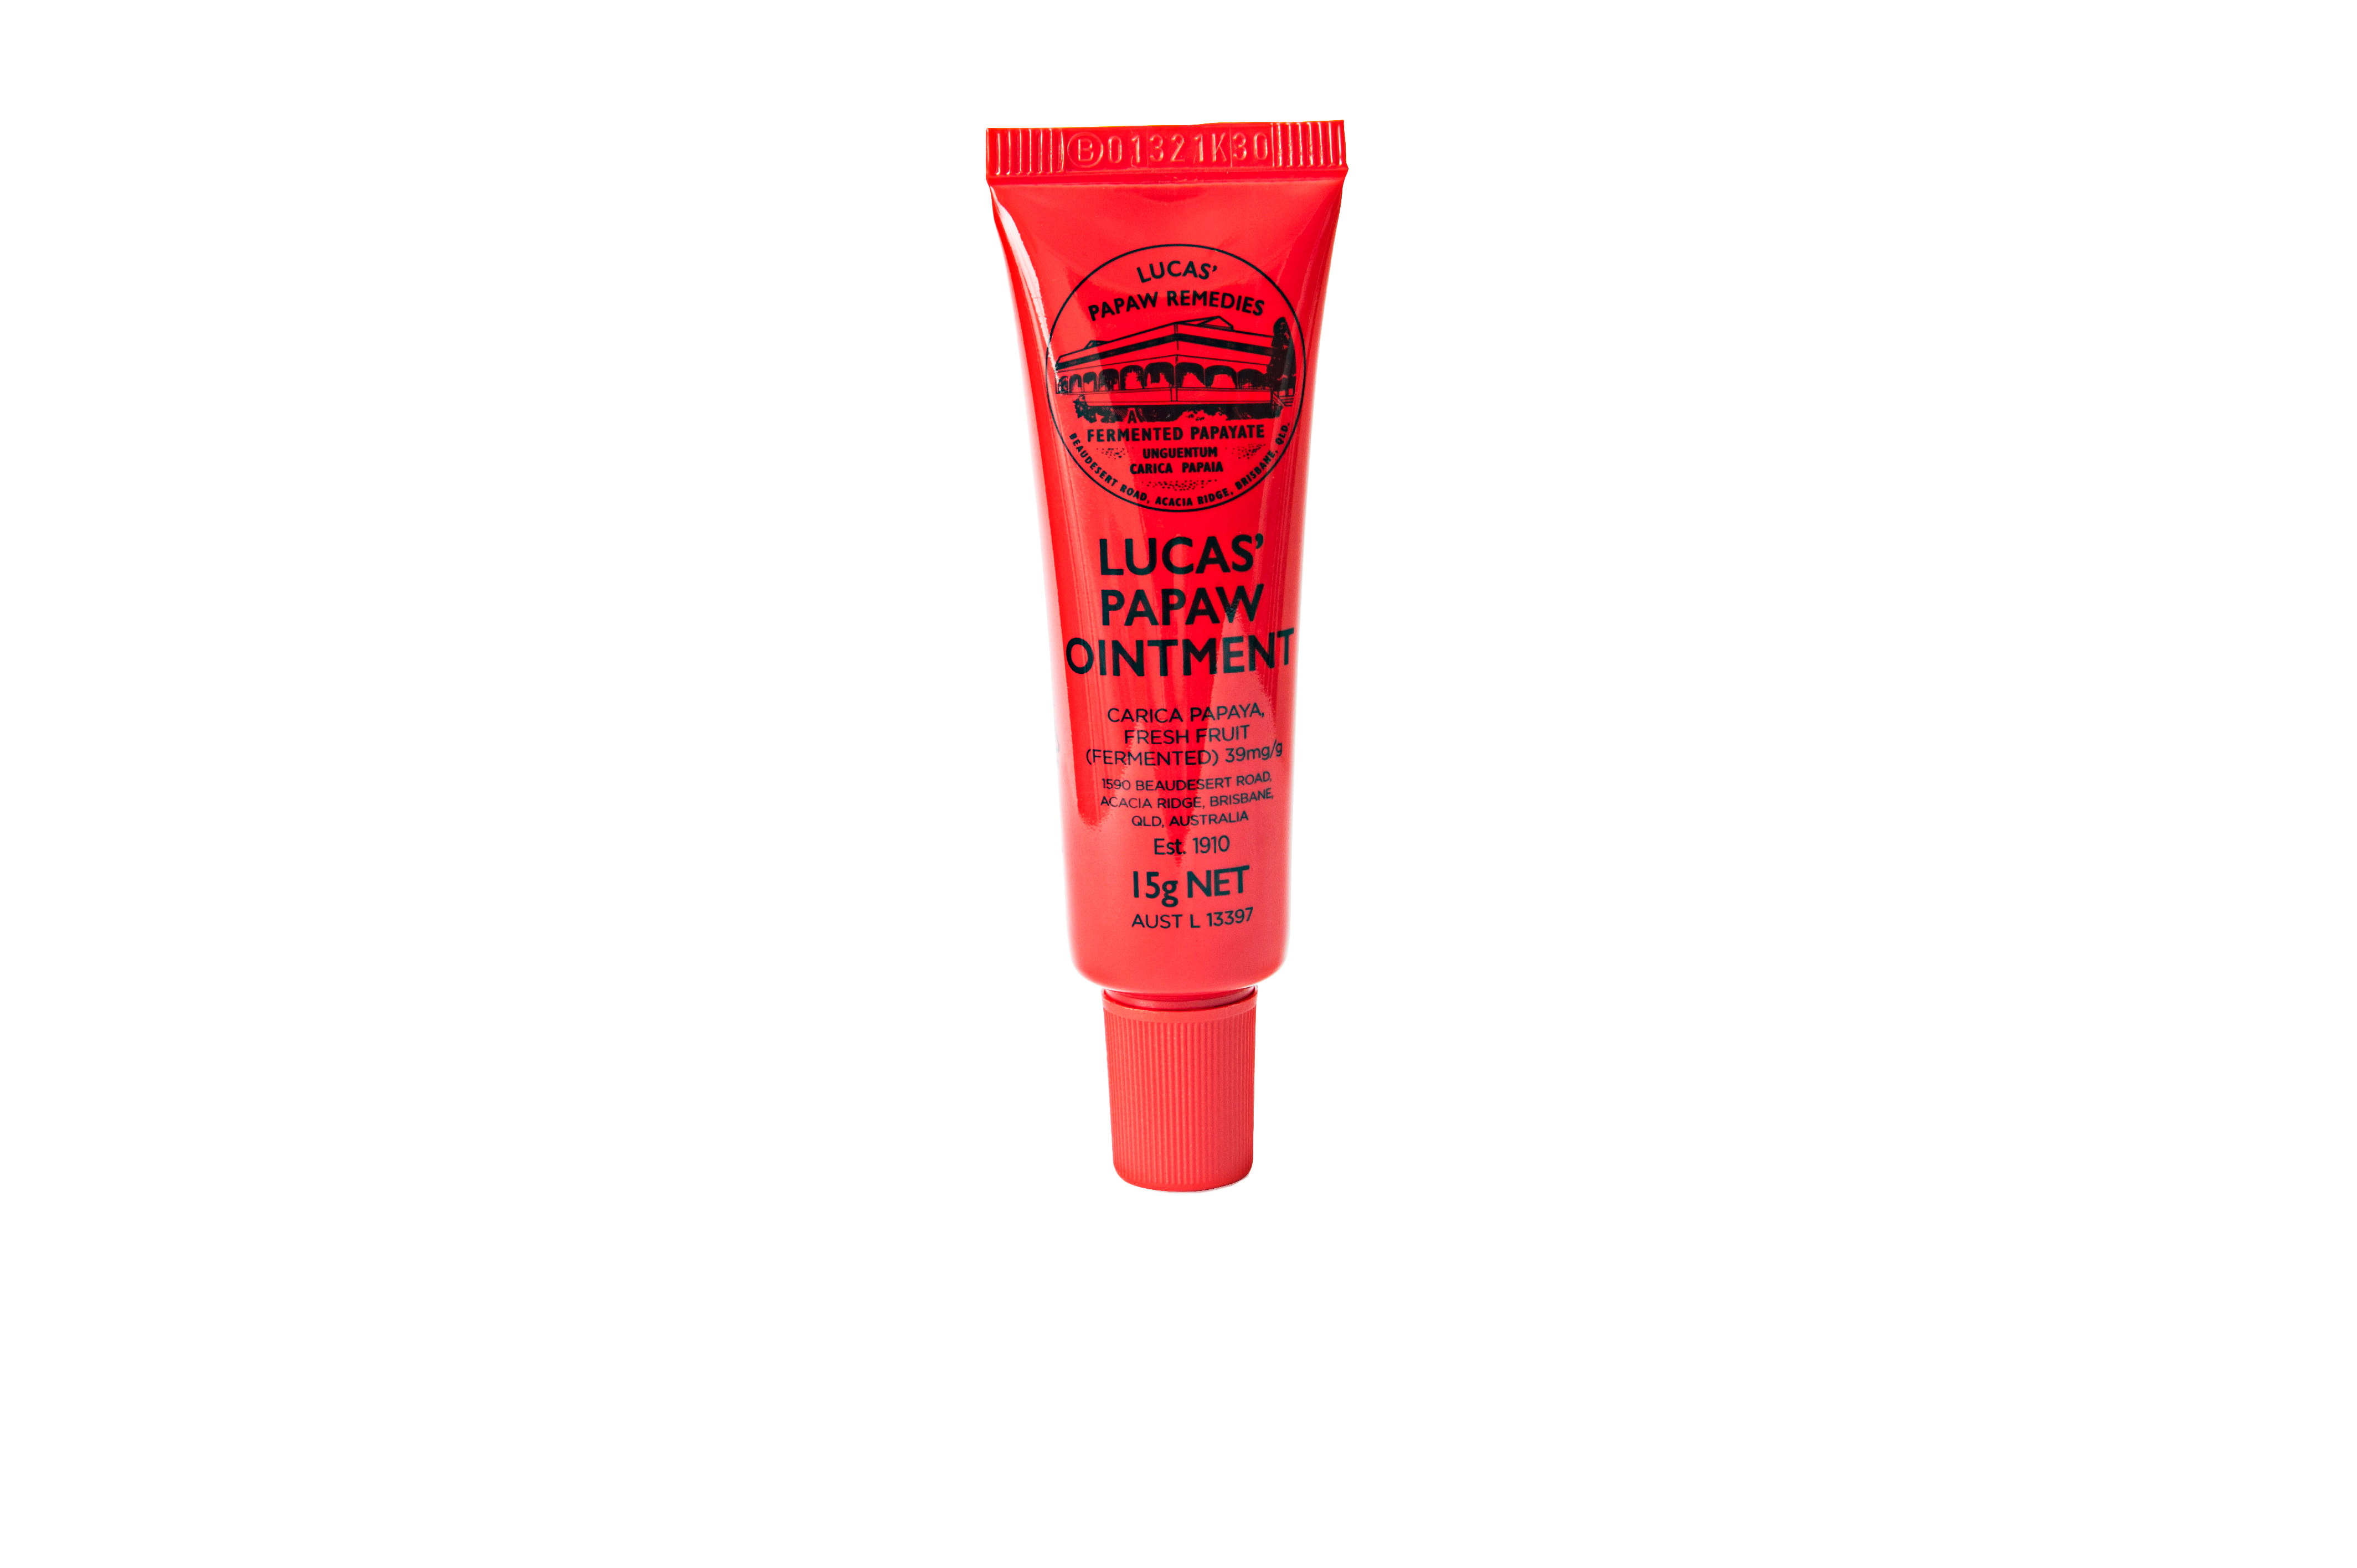 Lucas’ Papaw Ointment 15gm Tube